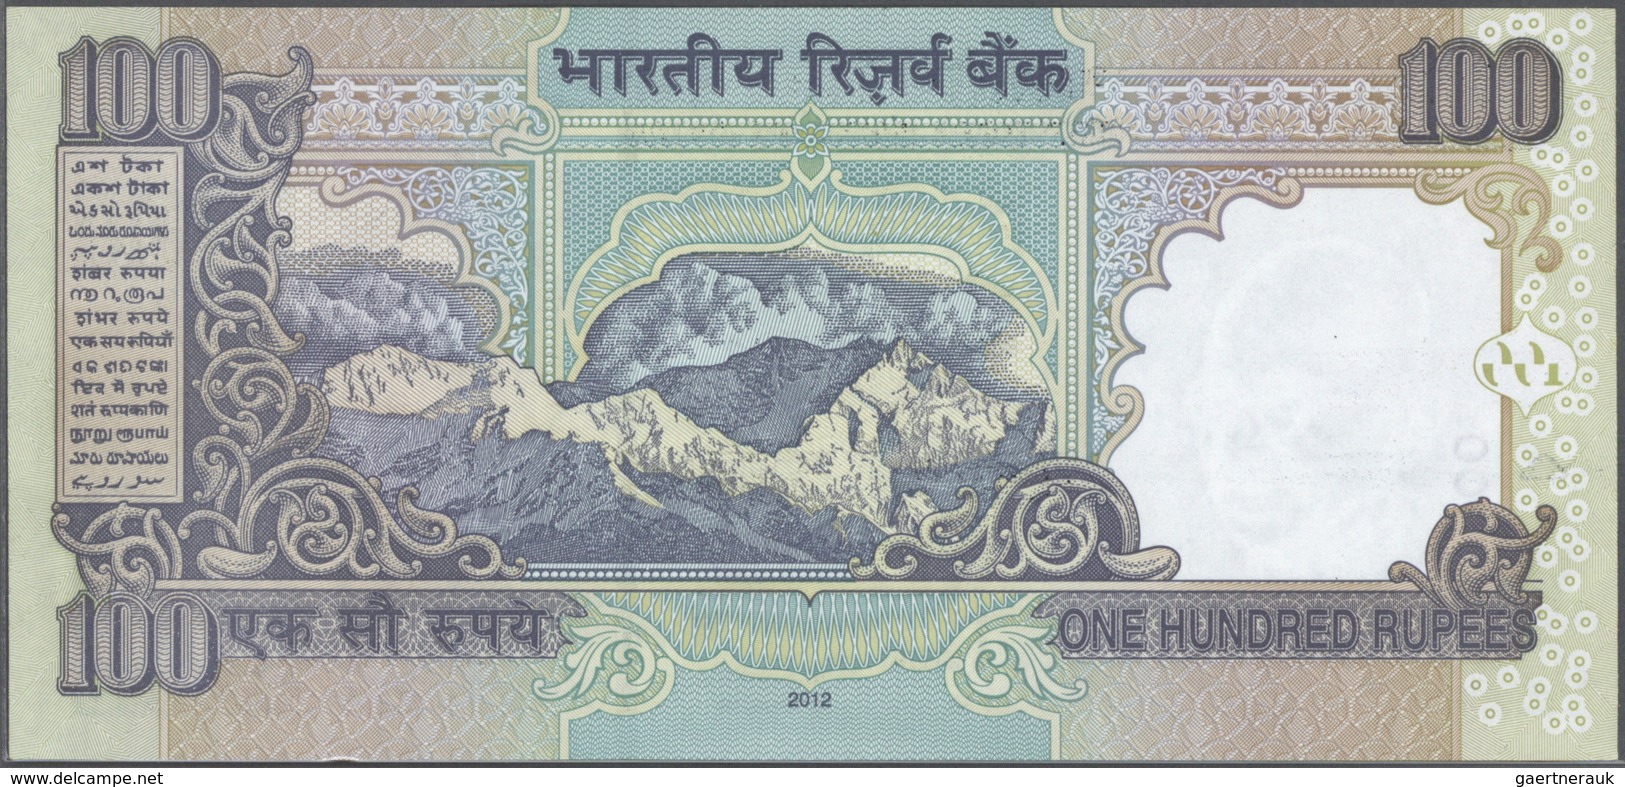 India / Indien: set of 10 notes 100 Rupees 2009 P. 98 all with interesting serial number containing: